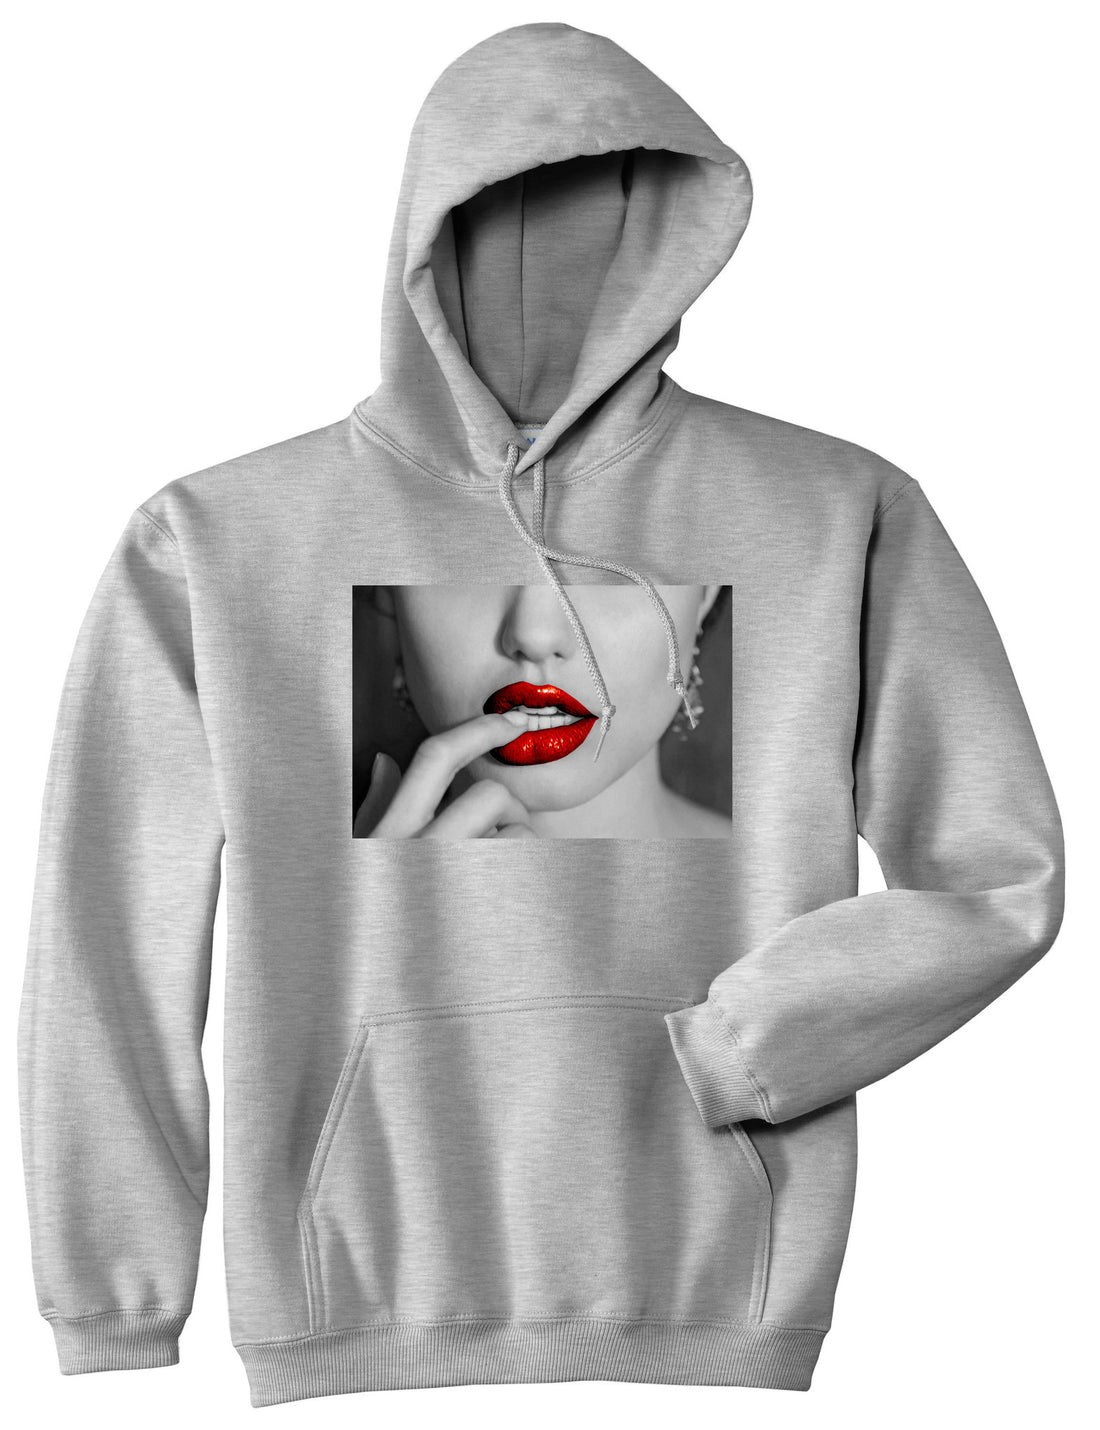  Angelina Red by Kings Of NY Lips Jolie Sexy Hot Picture Pullover Hoodie Hoody In Grey by Kings Of NY